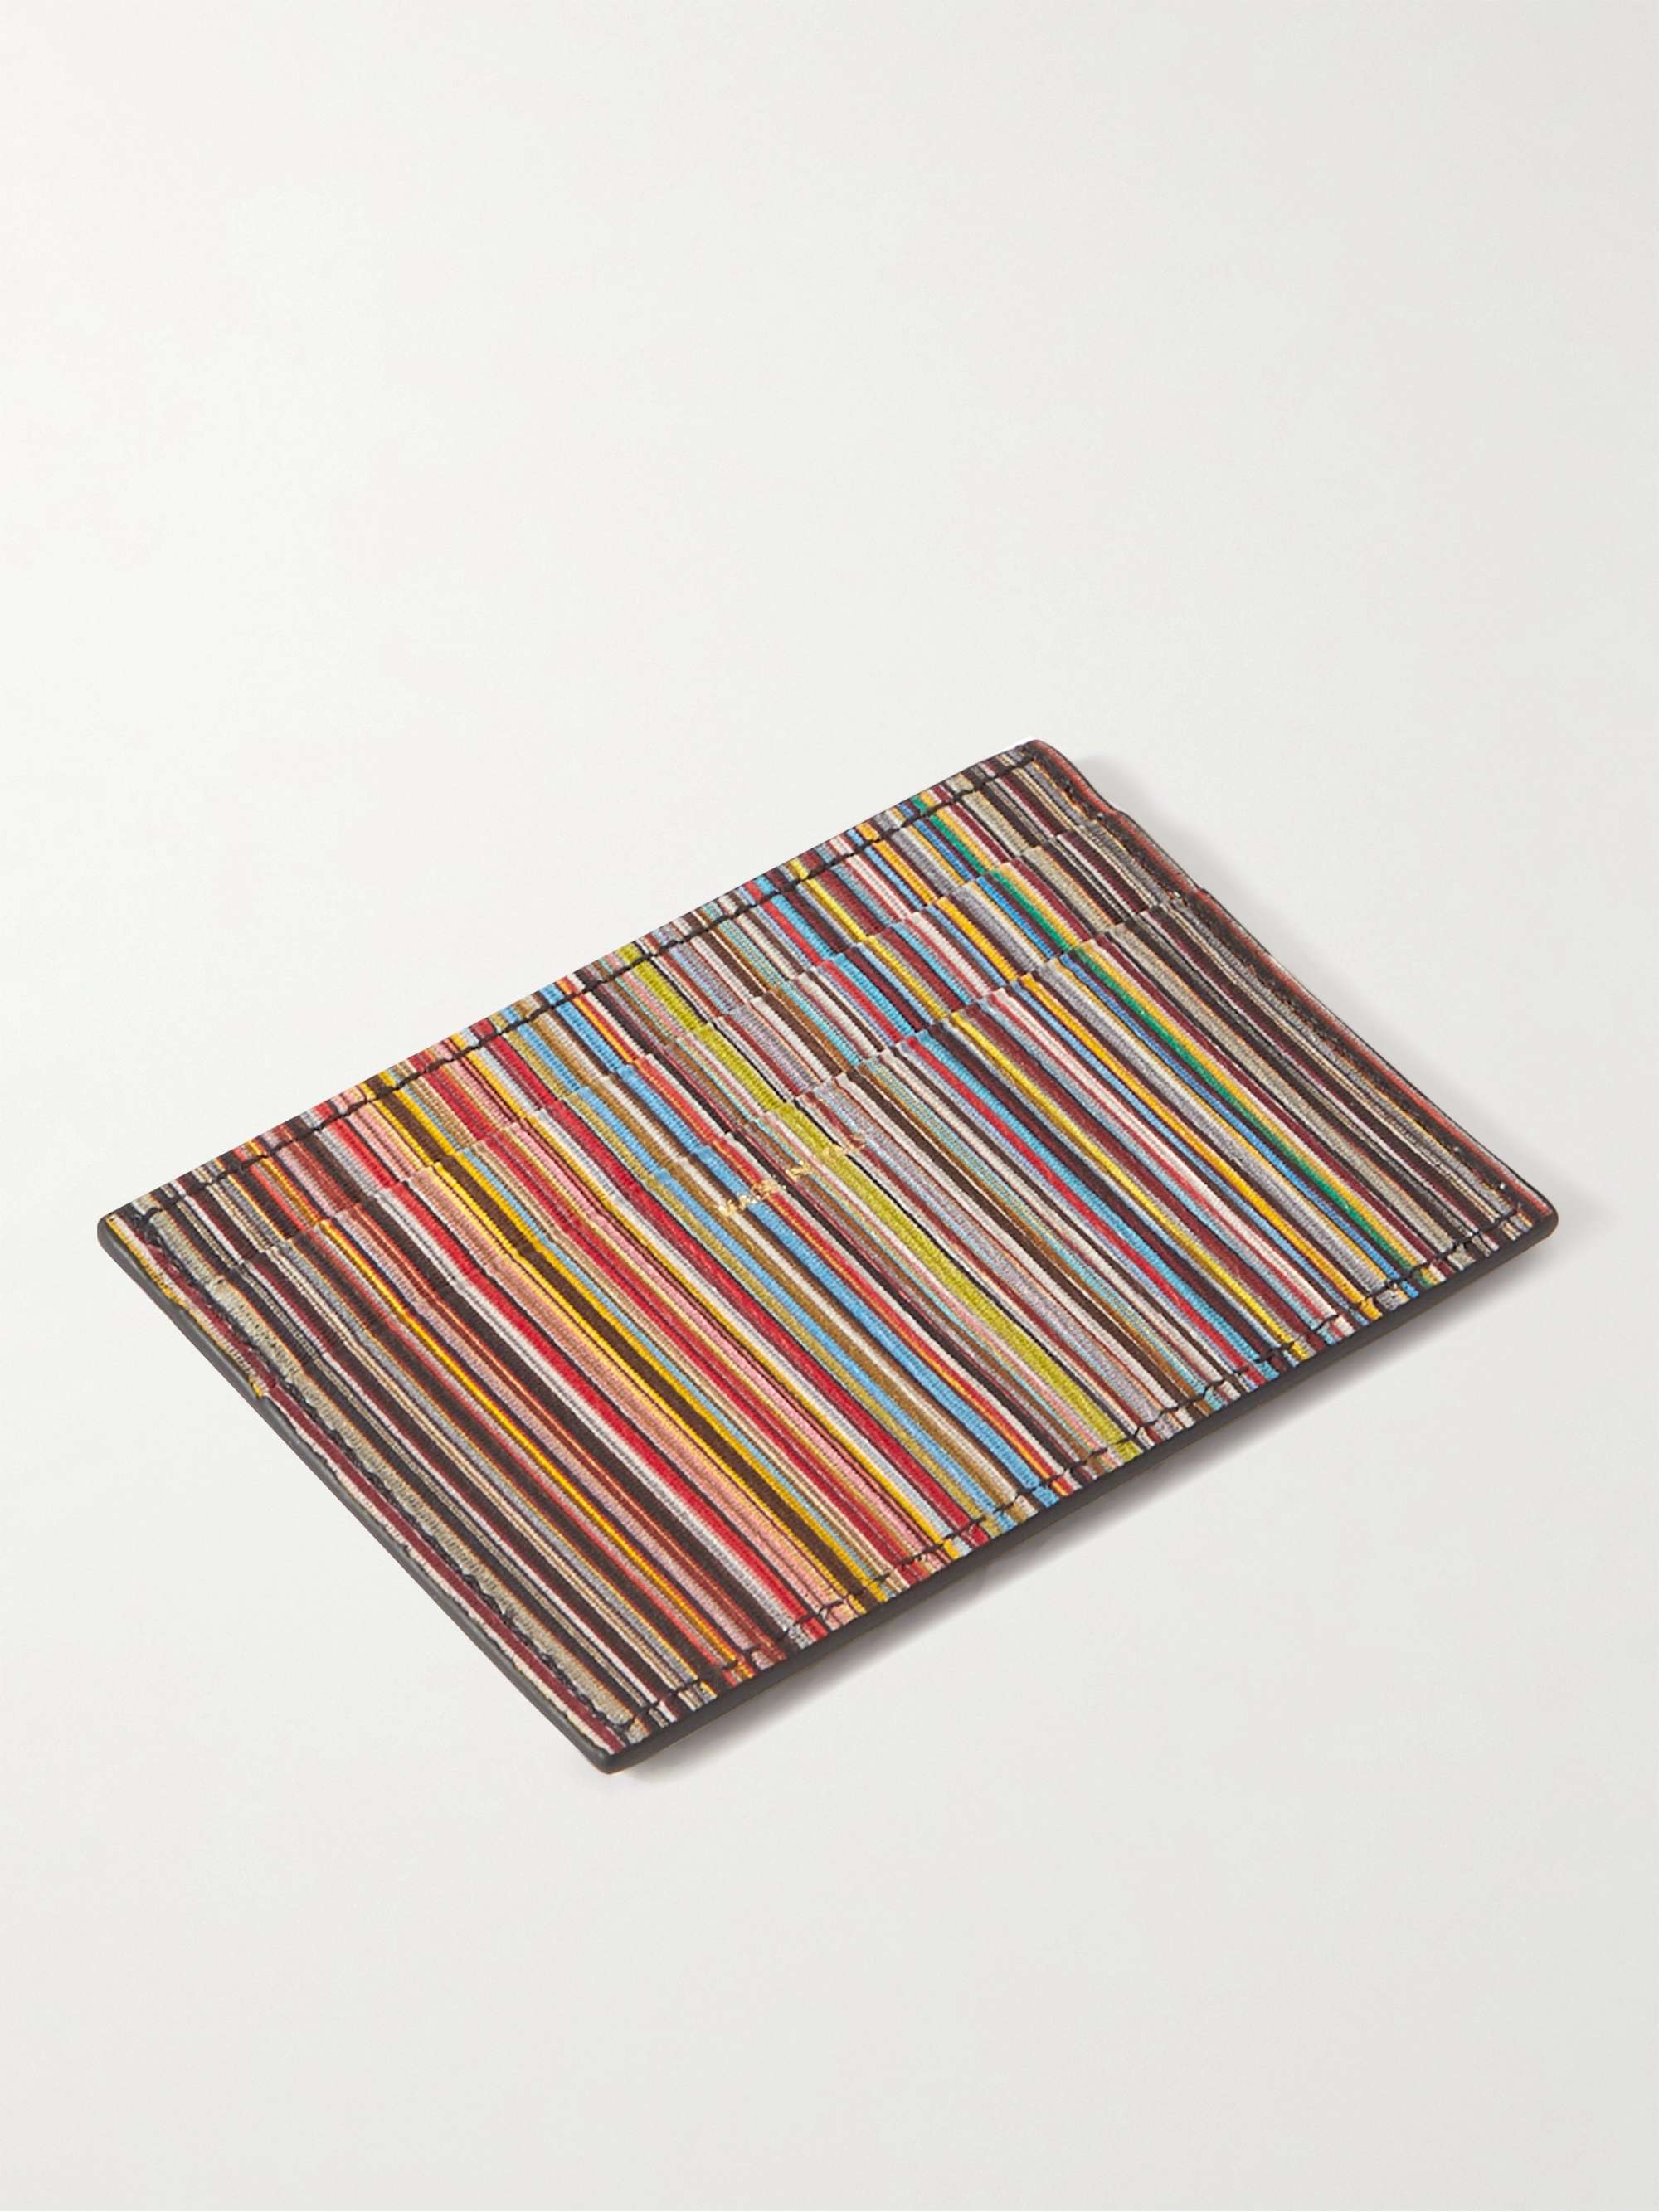 PAUL SMITH Striped Leather Cardholder and Three-Pack Cotton-Blend Socks Gift Set